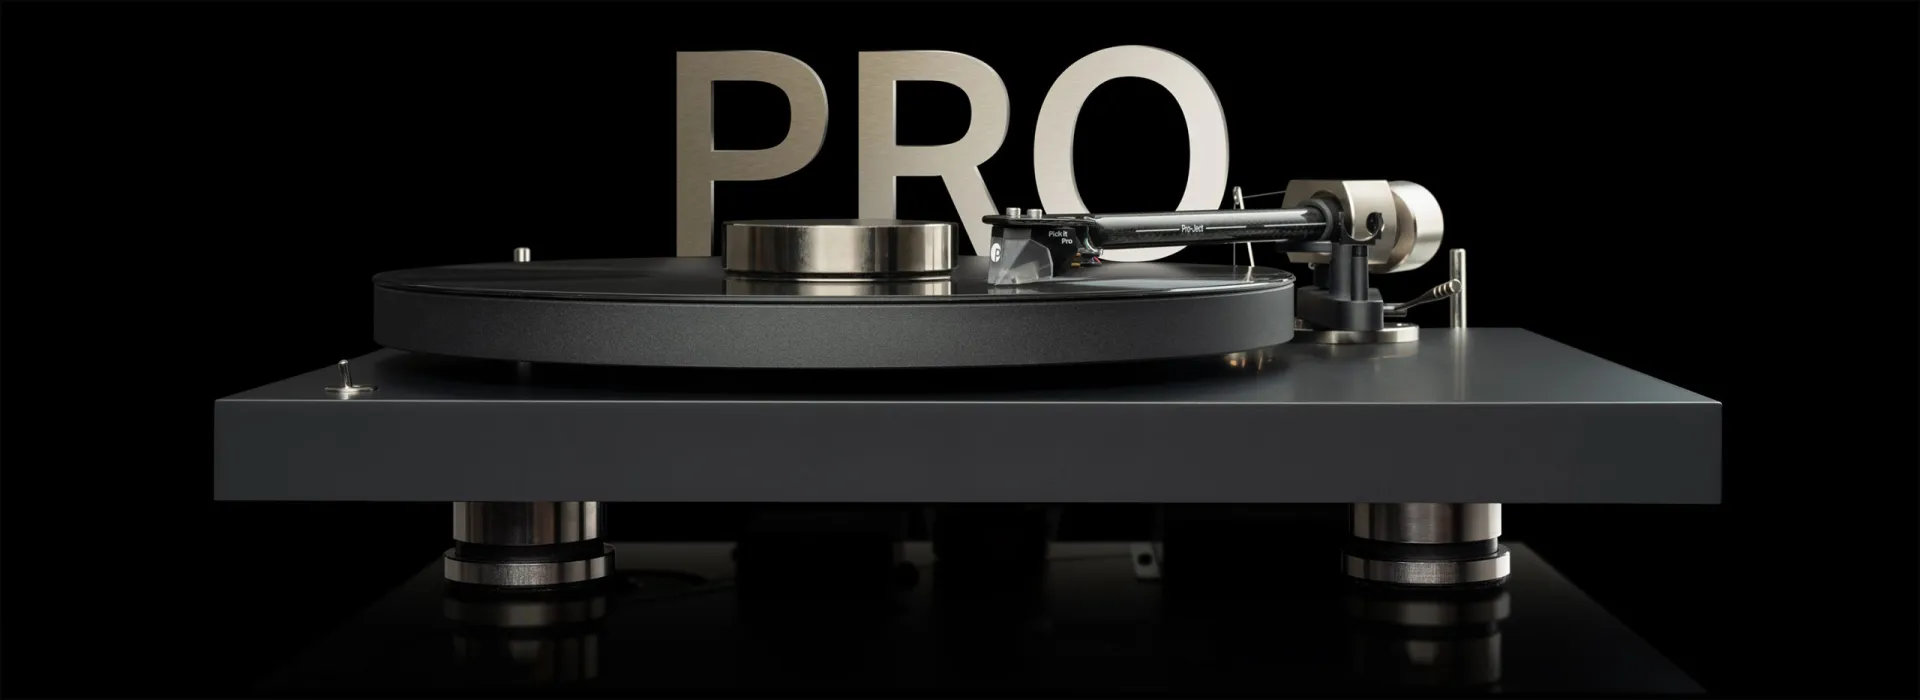 Our 30 years anniversary turntable